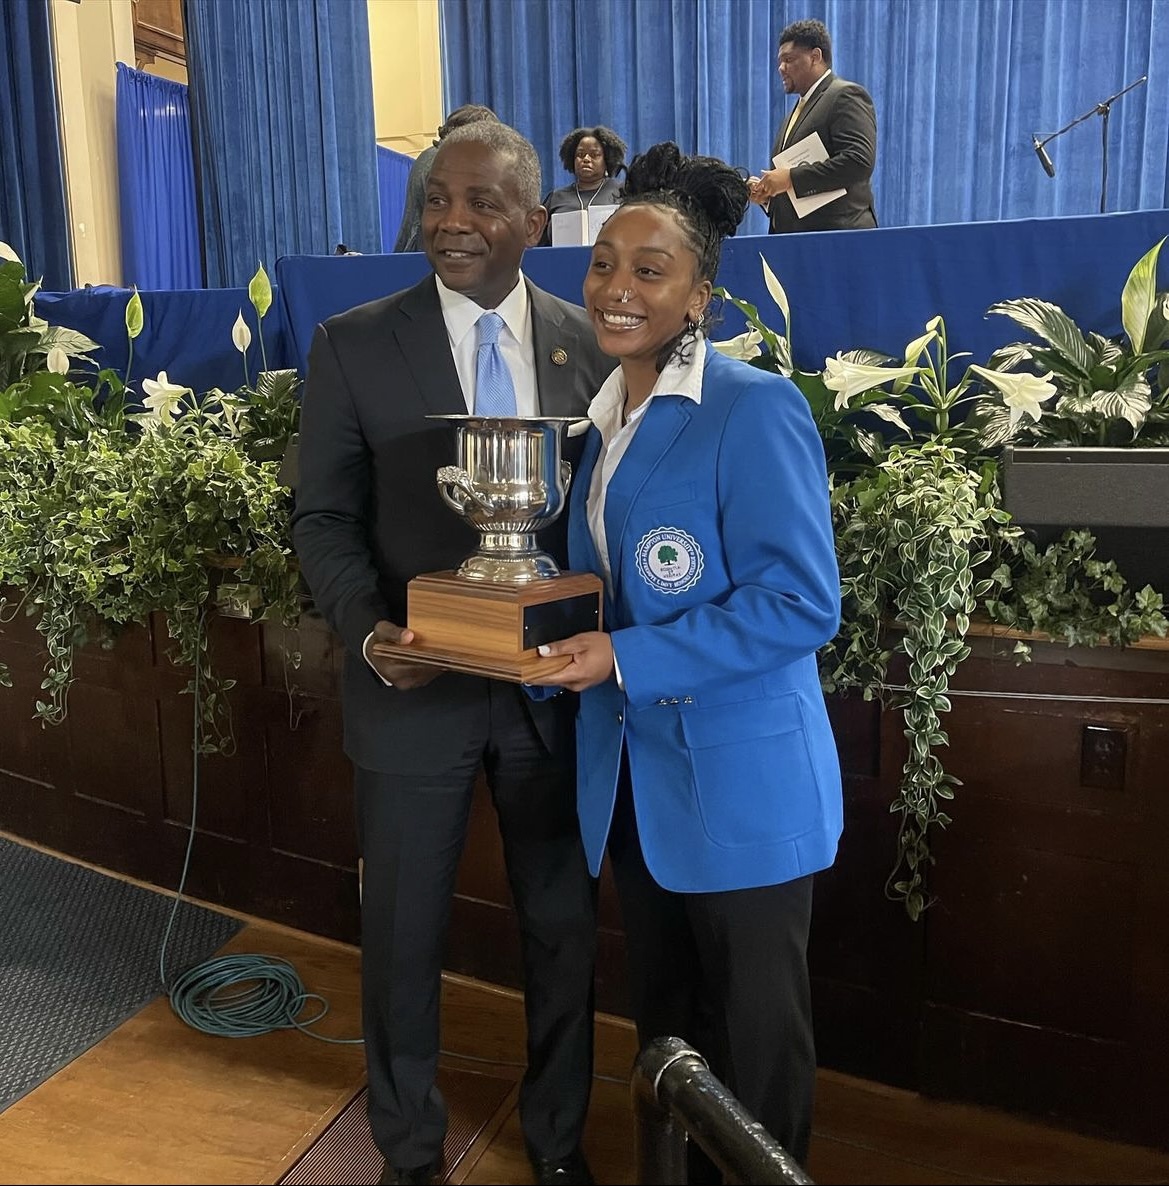 A HUGE congratulations to our very own graduating senior, Lailah Daniel, who received Hampton University’s most prestigious academic award given at the university apart from a degree, The President’s Cup. We are so proud! #WeAreHamptonU